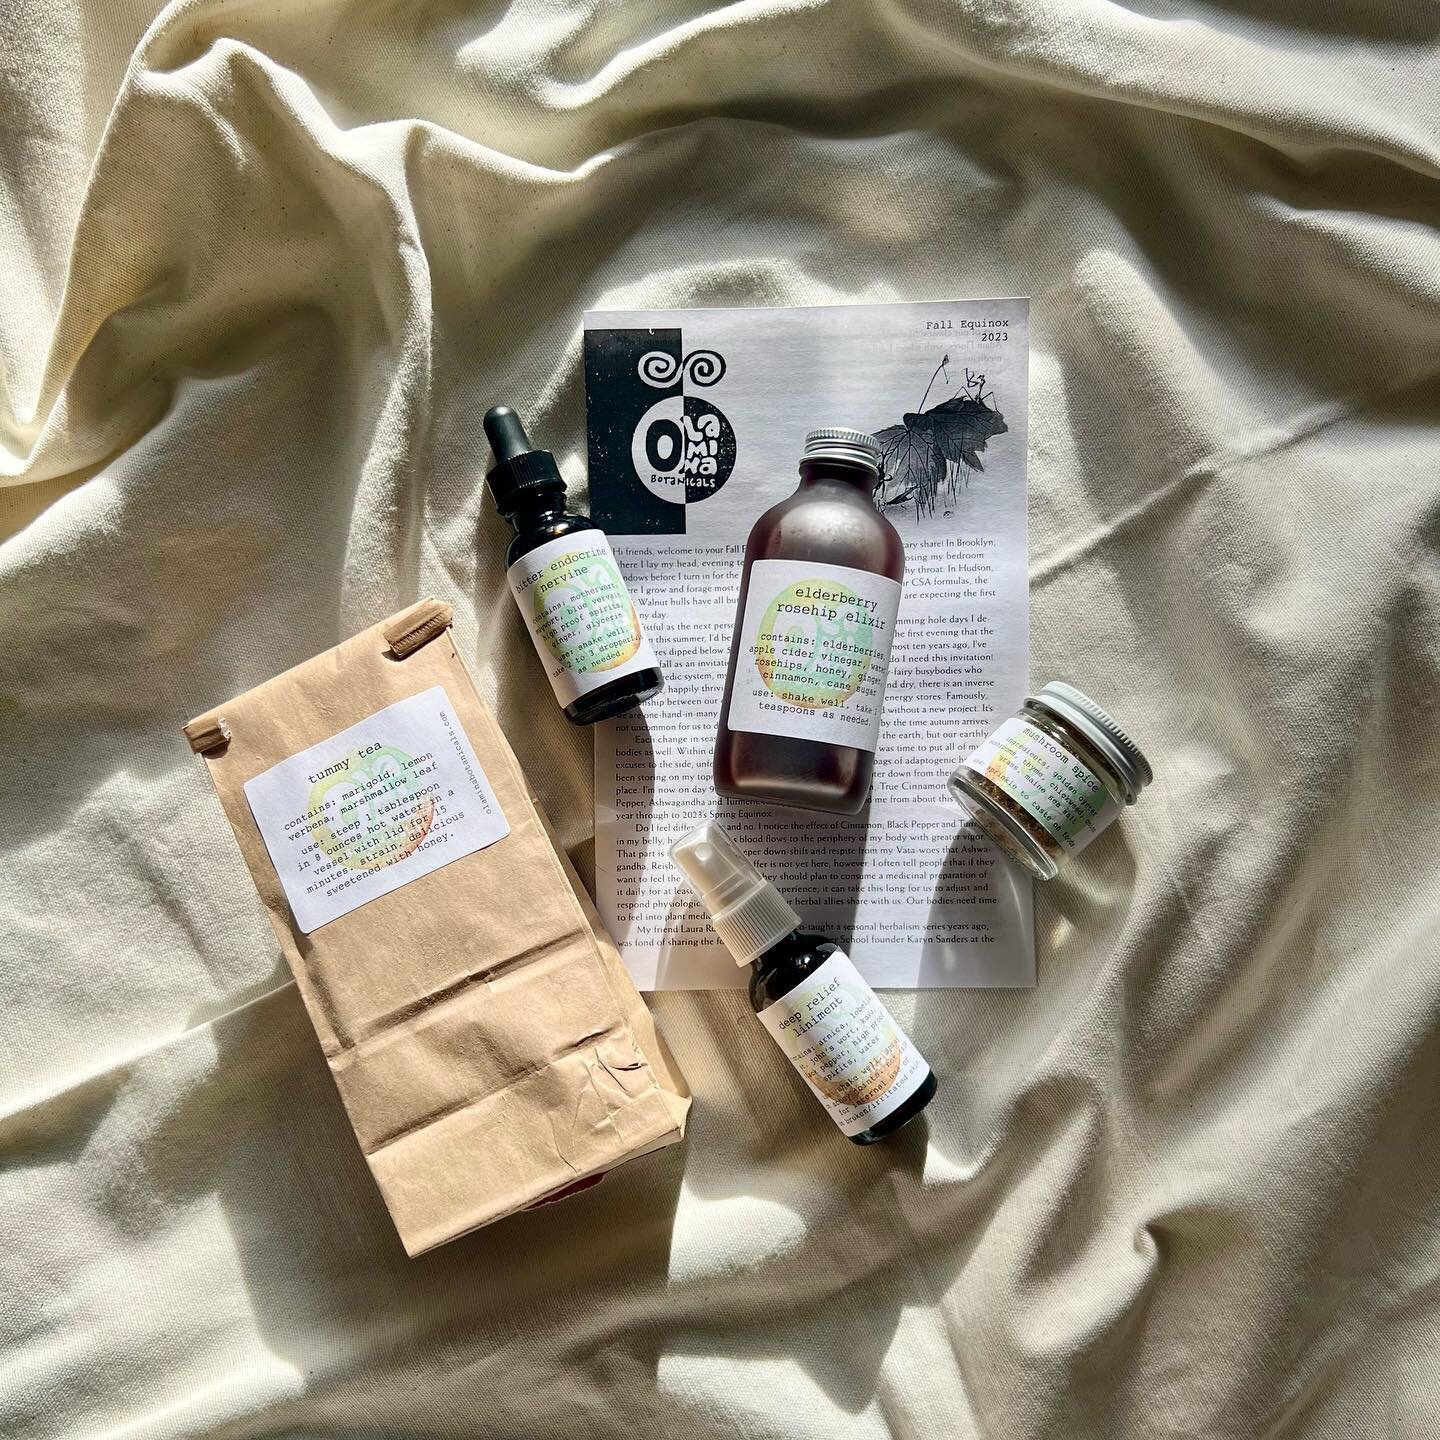 Jess here, finally posting an image of the Fall Equinox shares I sent members of Olamina Botanicals' Community Supported Apothecary (CSA) 2 months ago, the second of 4 herbal wellness boxes members will receive during the 2023-2024 season&mdash;which